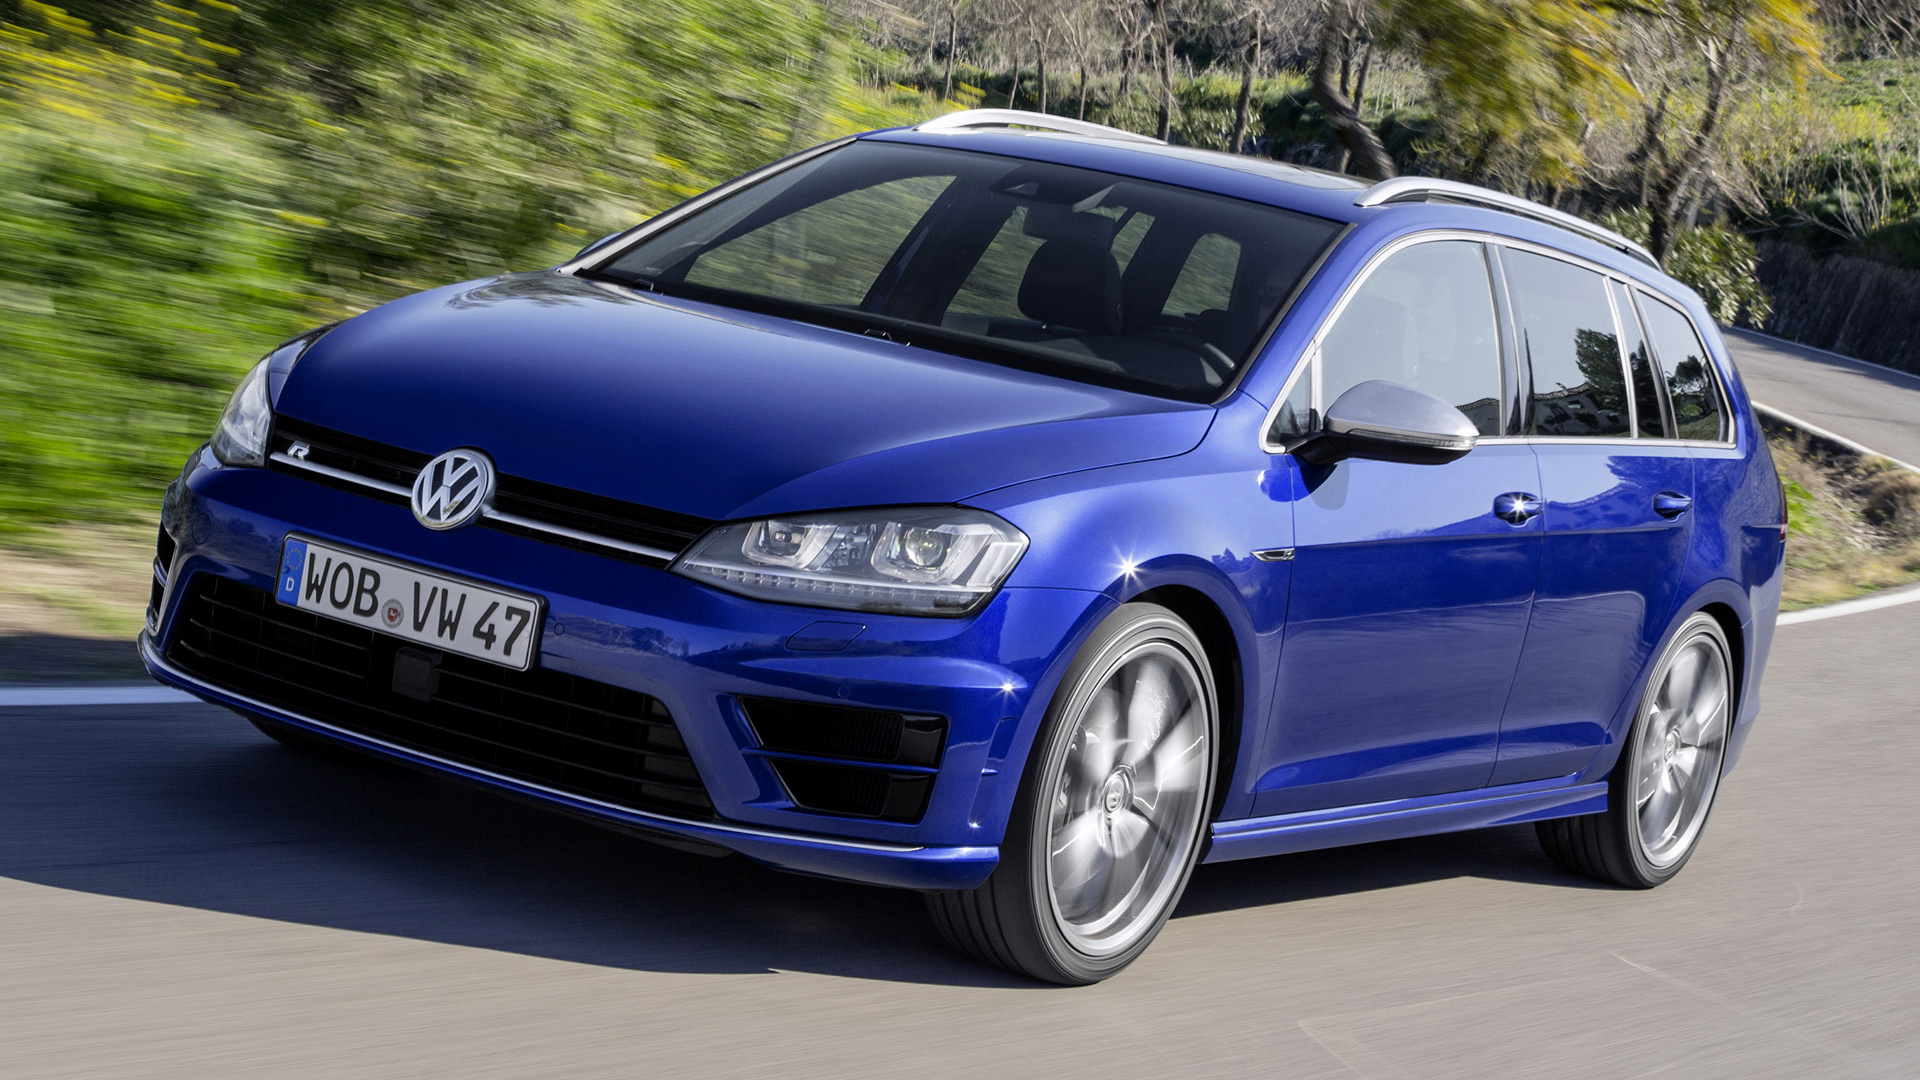 Volkswagen Golf R Variant 2015 Wallpapers and HD Images